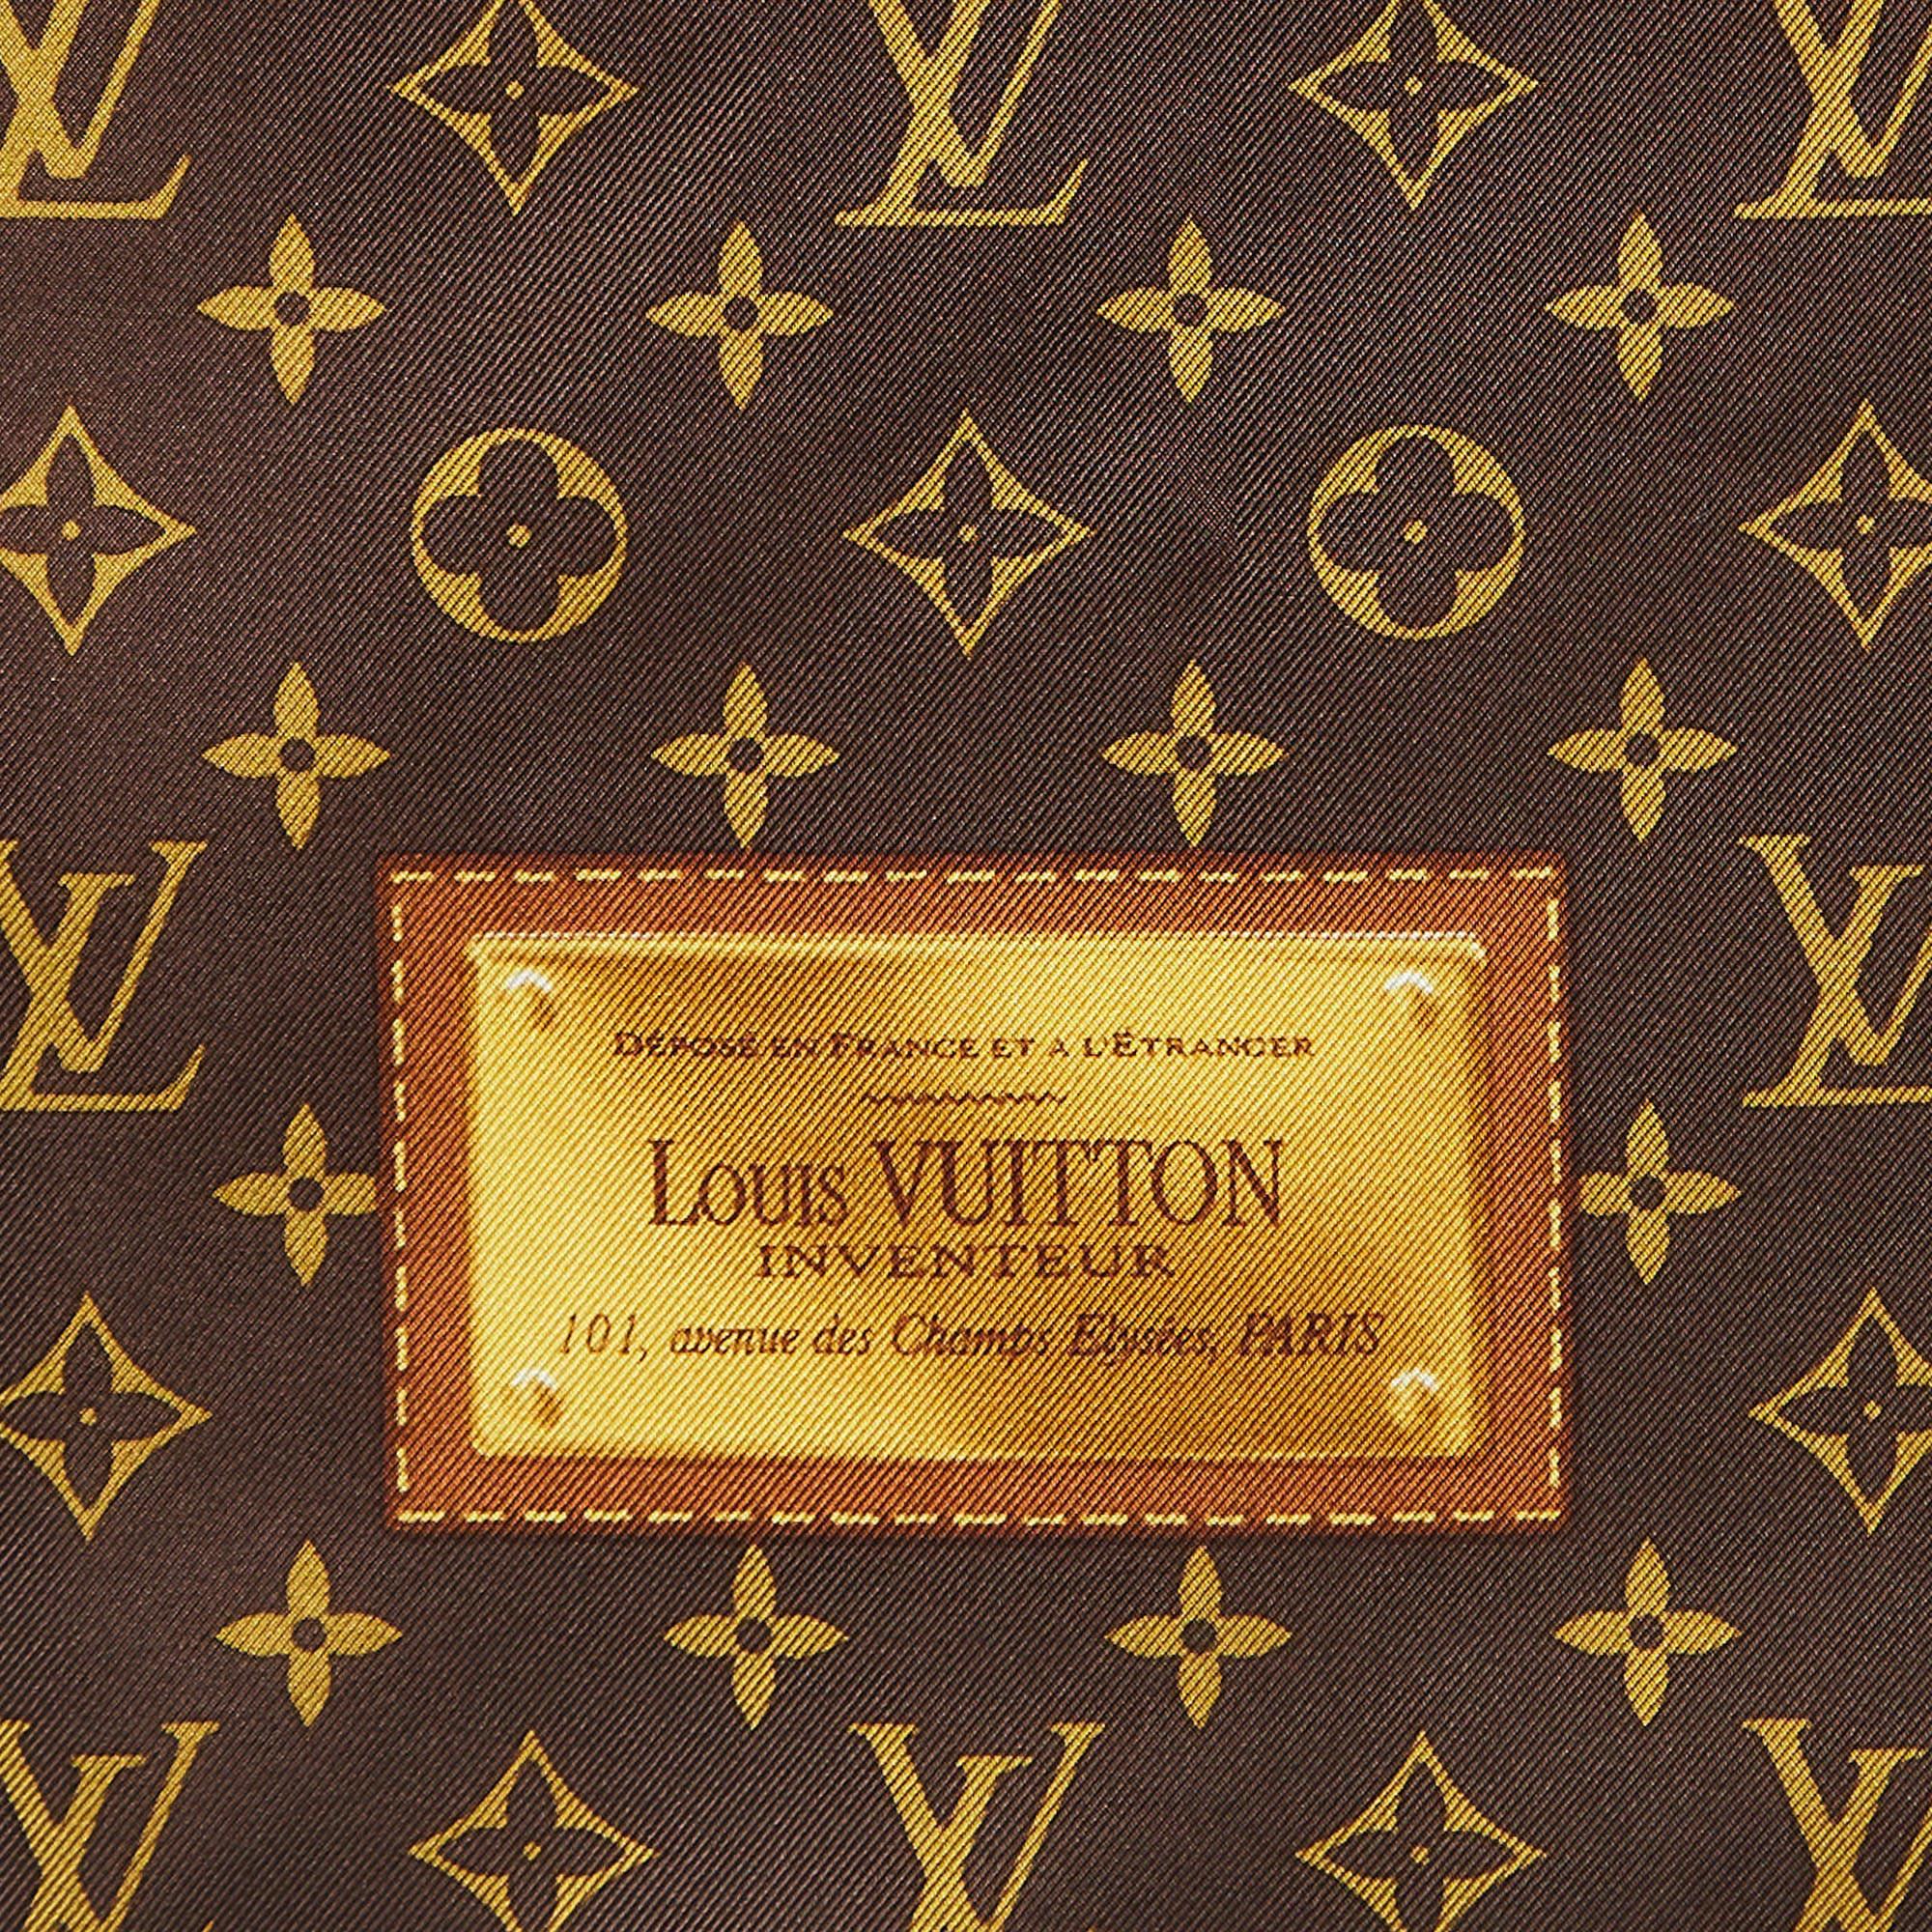 The Louis Vuitton scarf exudes timeless elegance. Crafted from luxurious silk, it features the iconic LV monogram in a rich brown hue, adding sophistication to any ensemble. Perfect for adding a touch of luxury to your attire.

